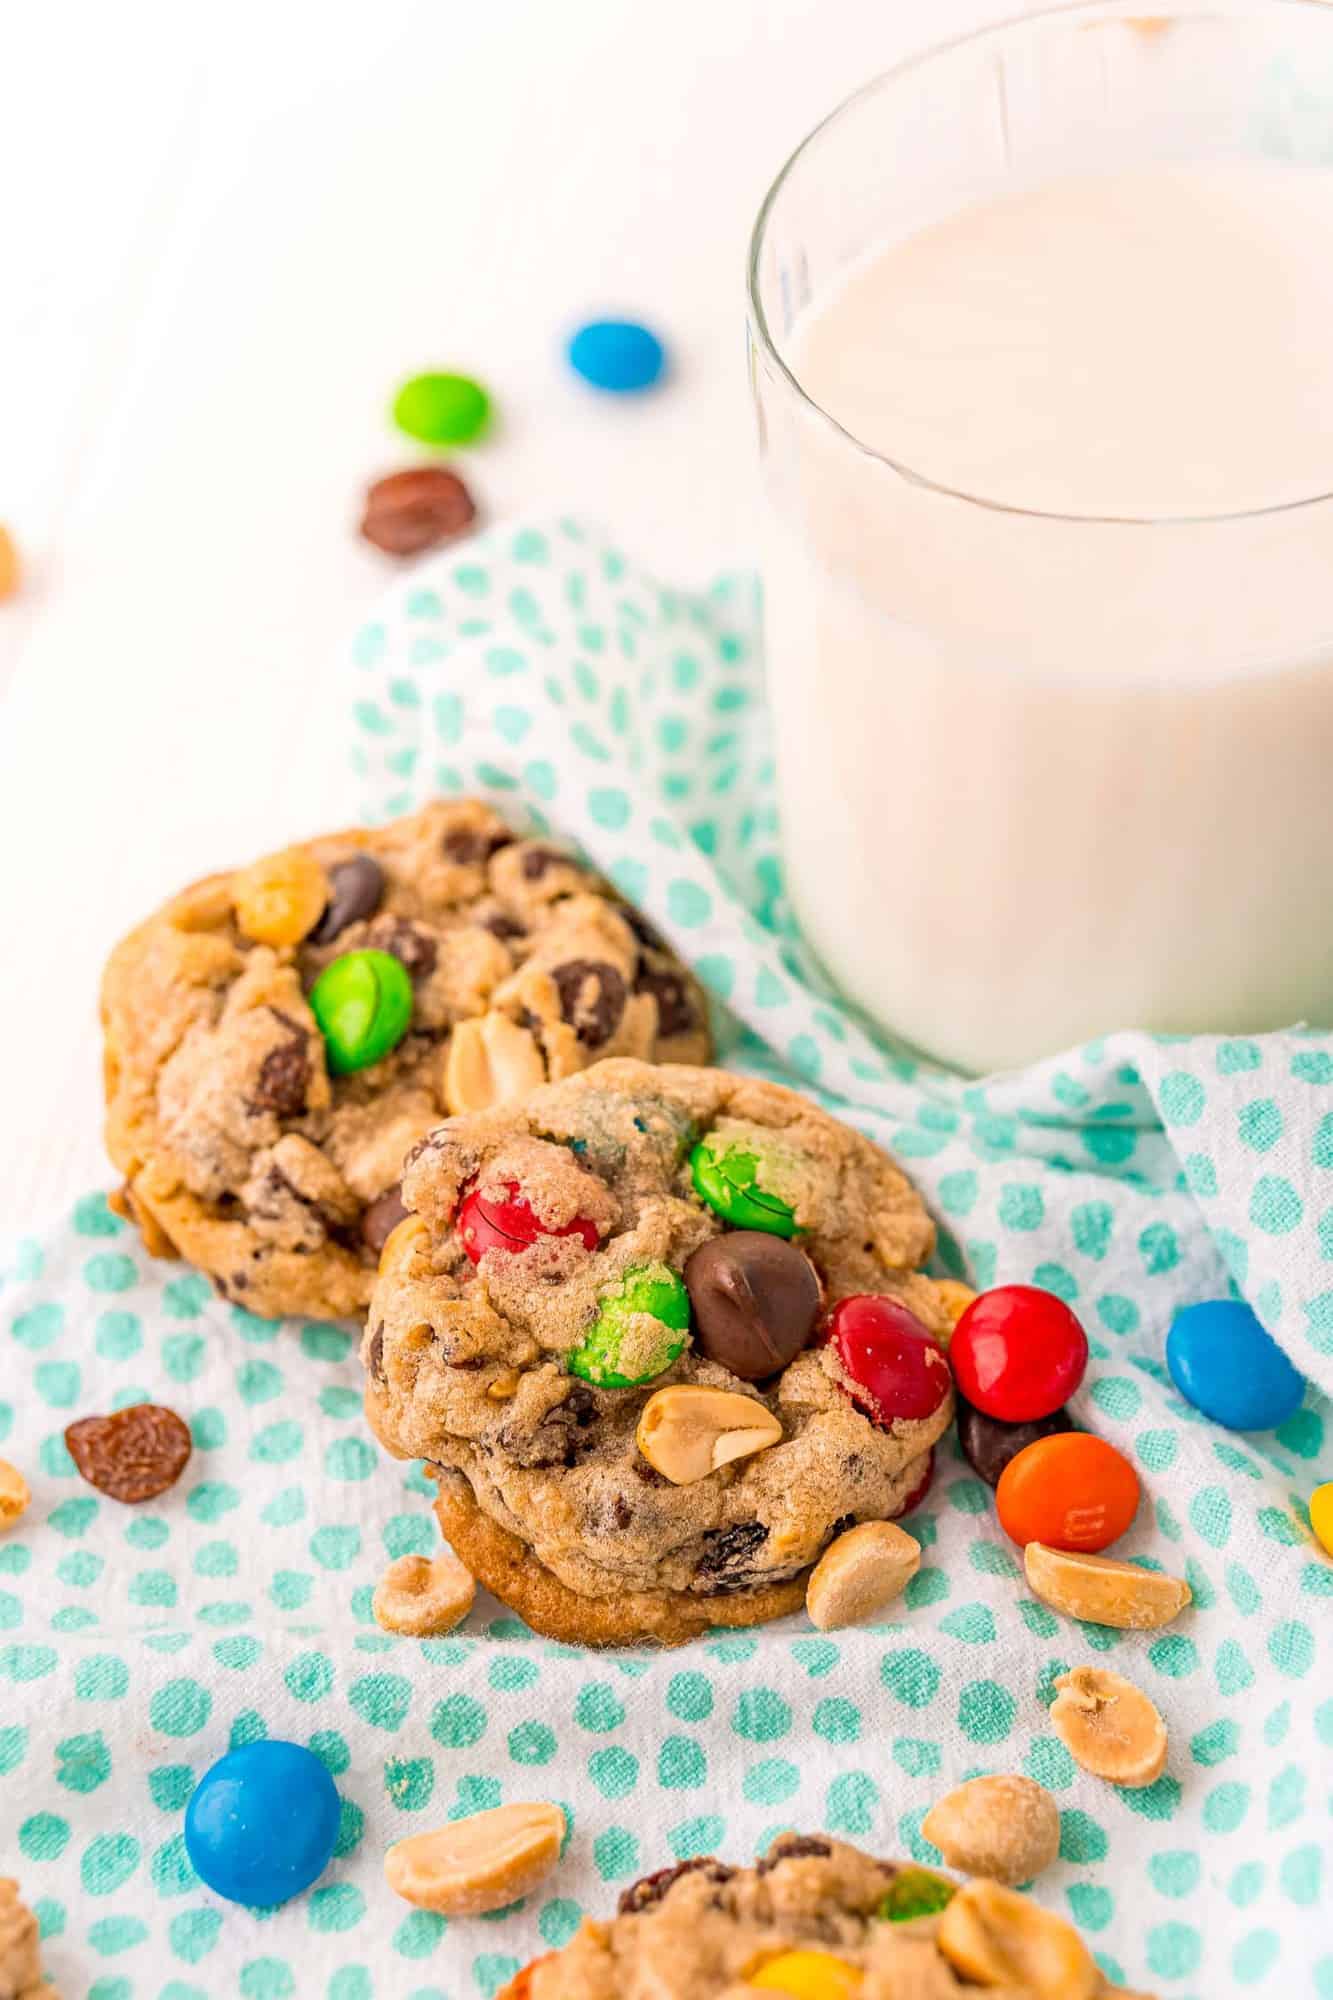 Two trail mix cookies by a glass of milk.